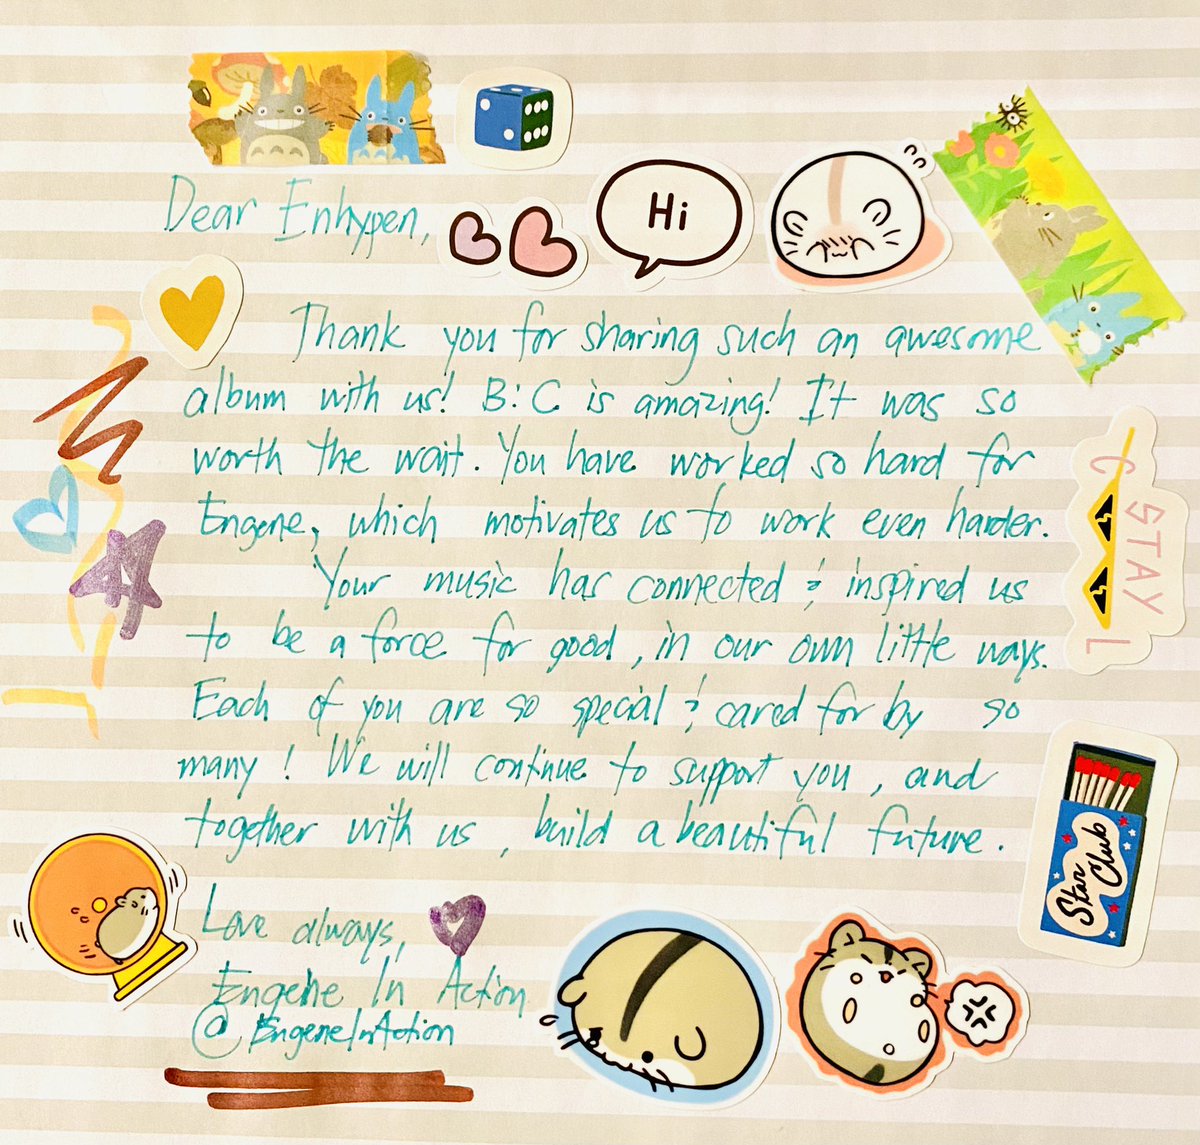 Engene, did you see the heartfelt letters the members wrote us?🥺 Let’s write them back & continue supporting them! You can also post your letters in the comments below. #ENHYPEN #EnActofSupport @EngeneInAction @Enhypen